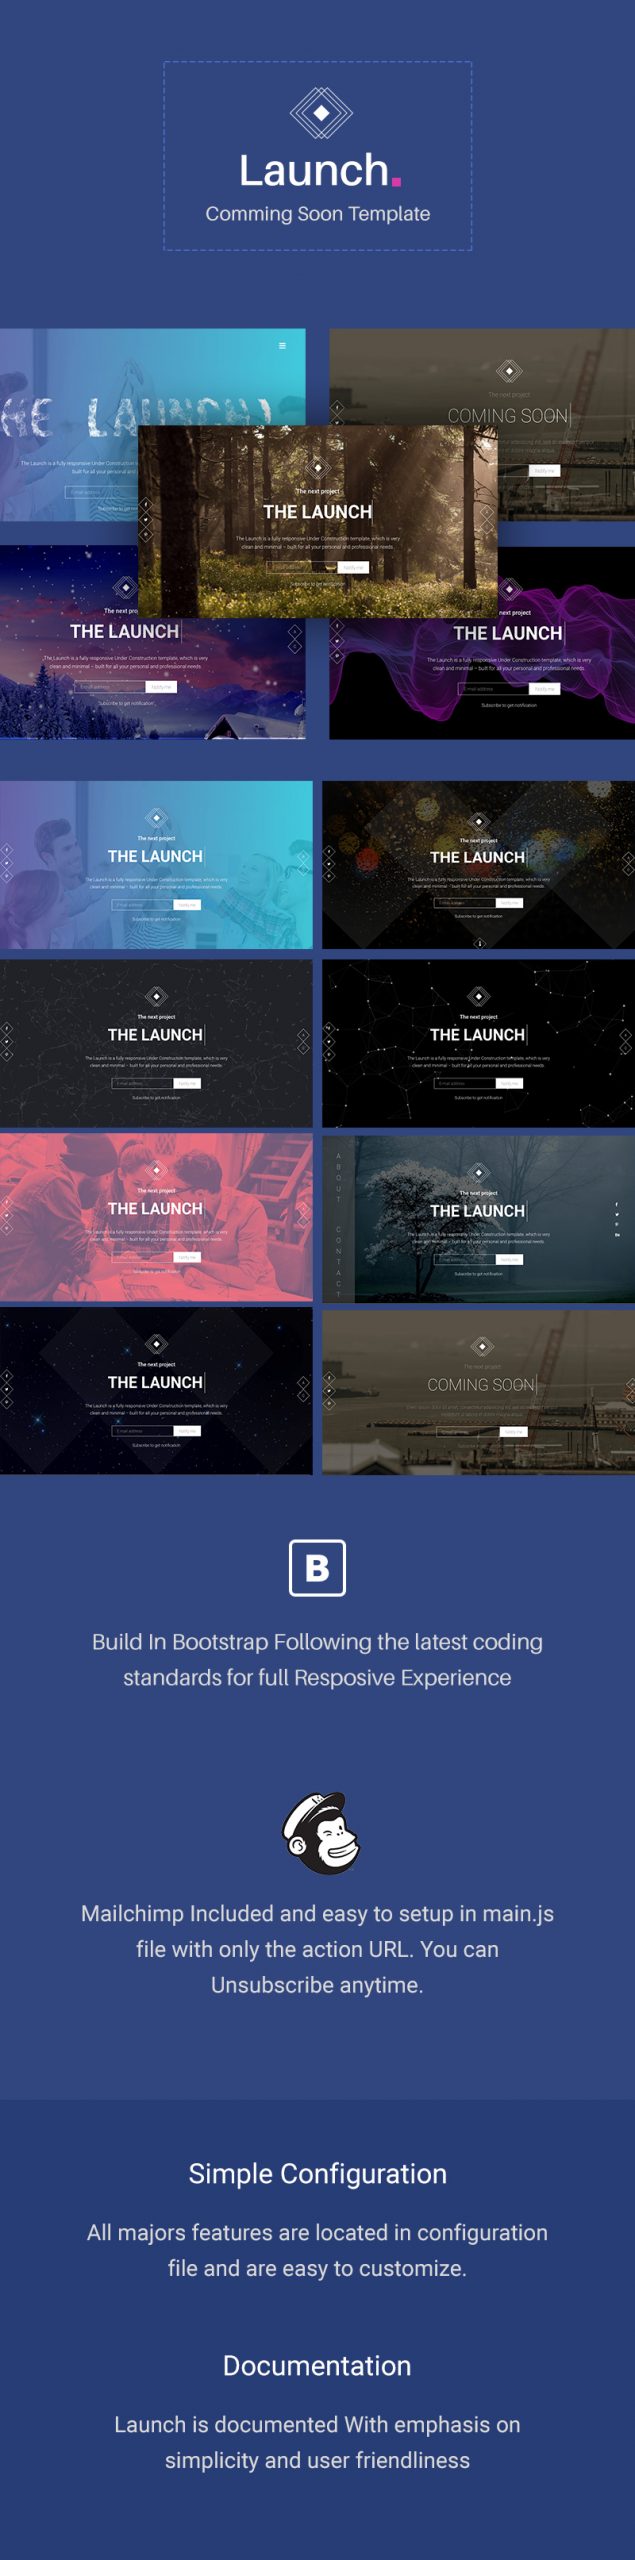 Launch - Coming Soon / Under Construction Template - 1